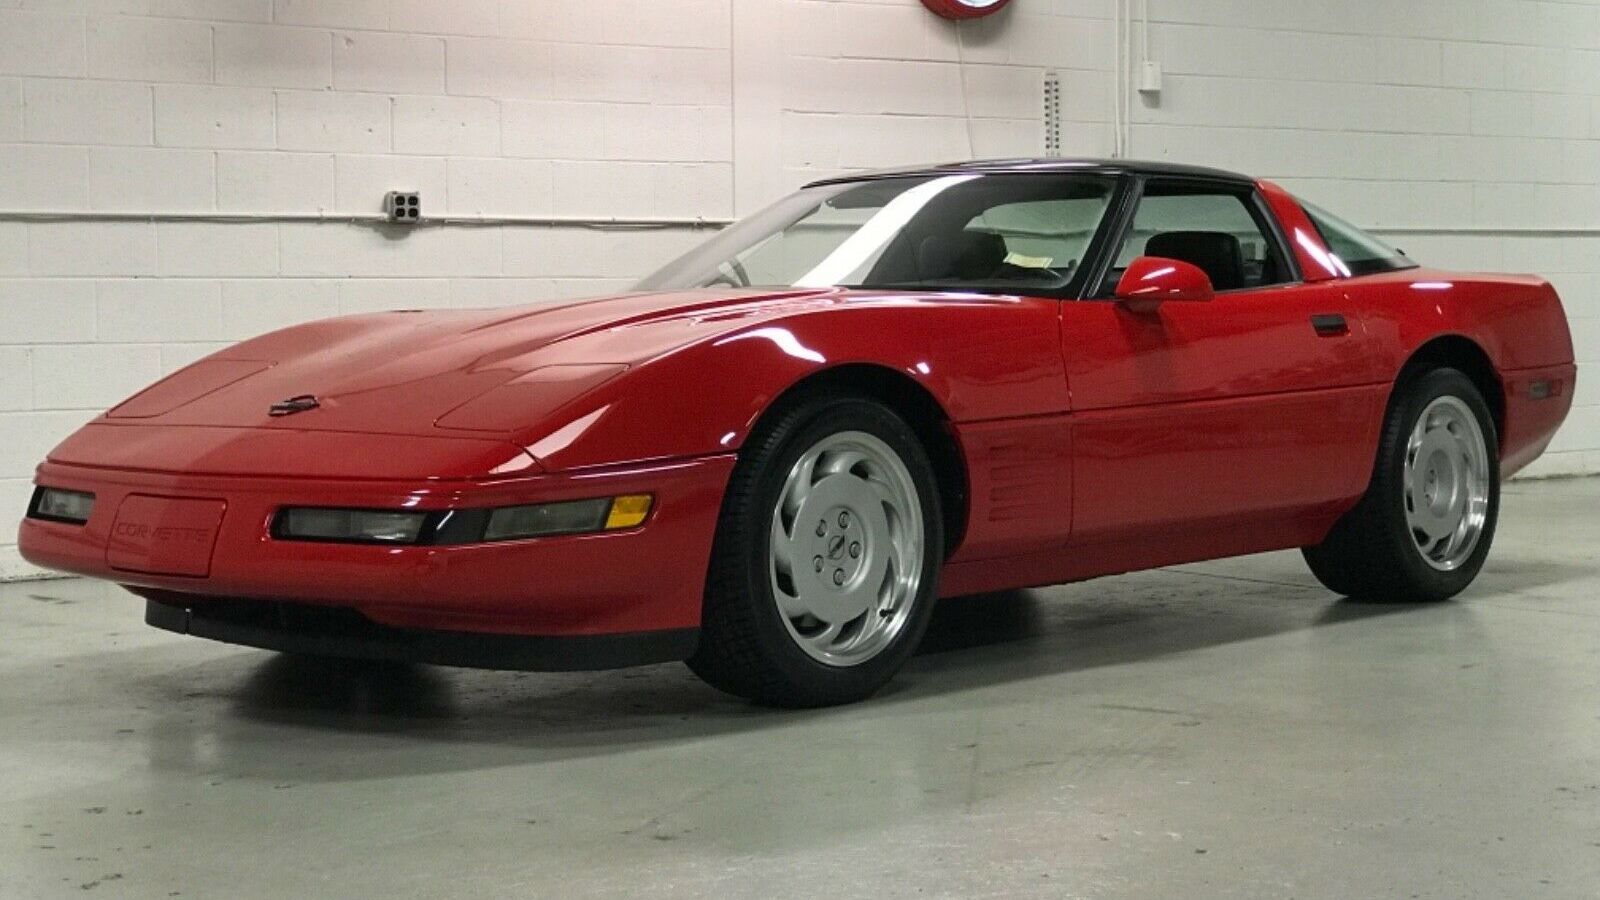 red 1991 Chevrolet Corvette ZR-1 in a parking